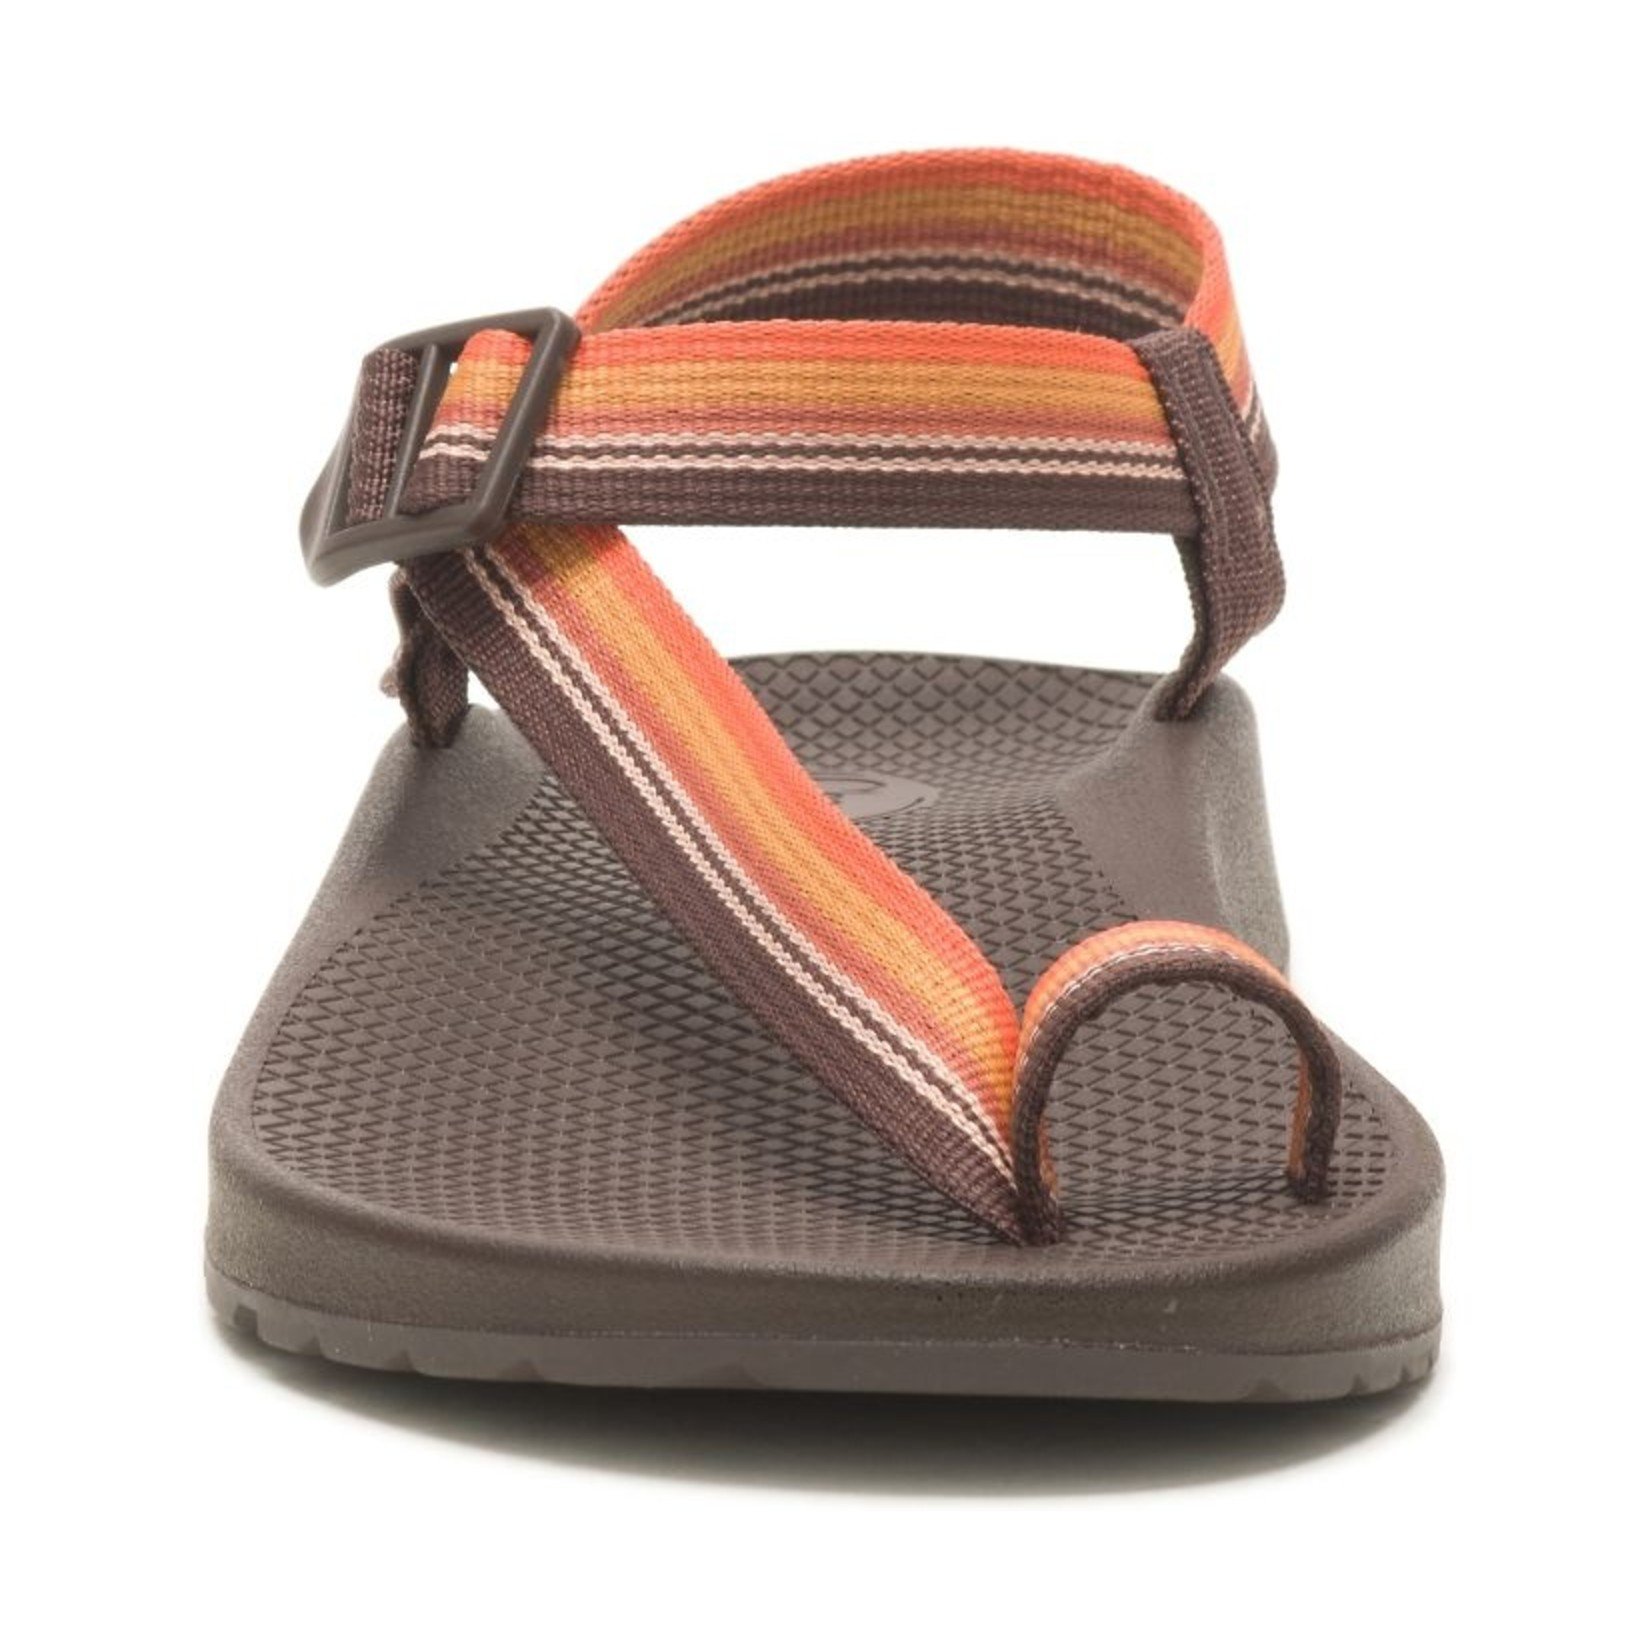  Chaco Men's Classic Leather FLIP Flop, Dark Brown, 10